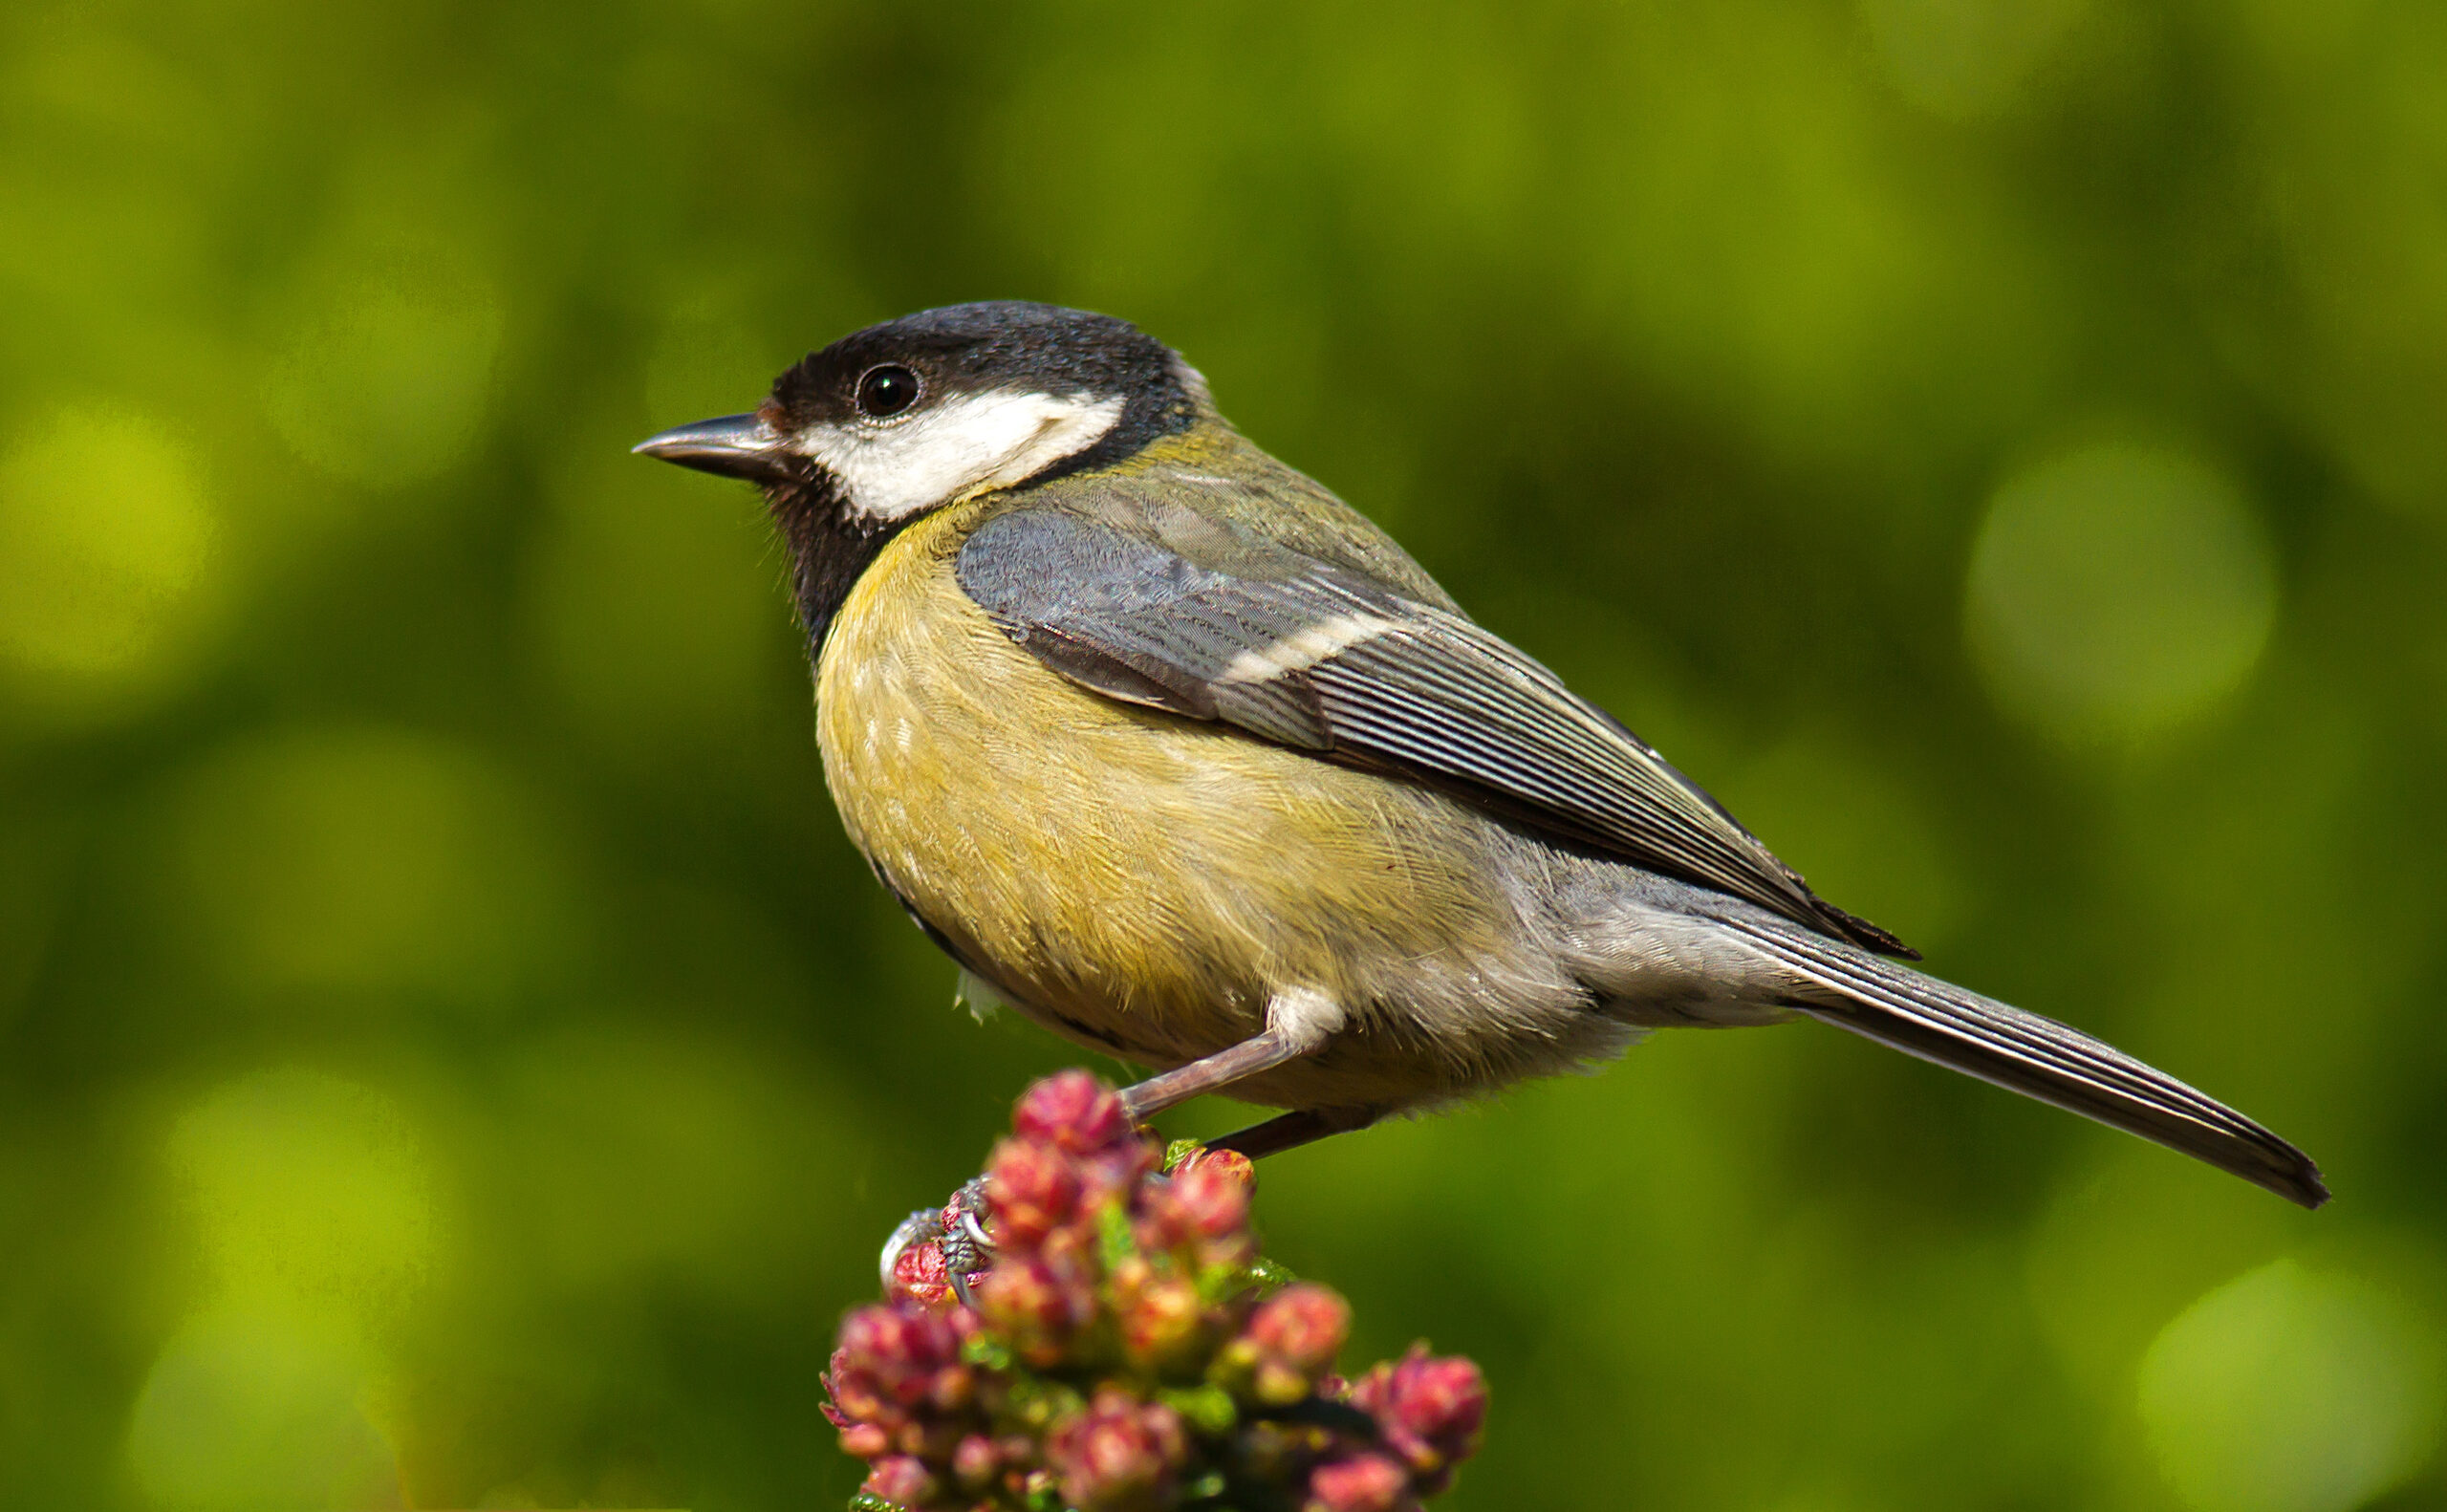 Great tits are killing birds and eating their brains. Climate change may be to blame.